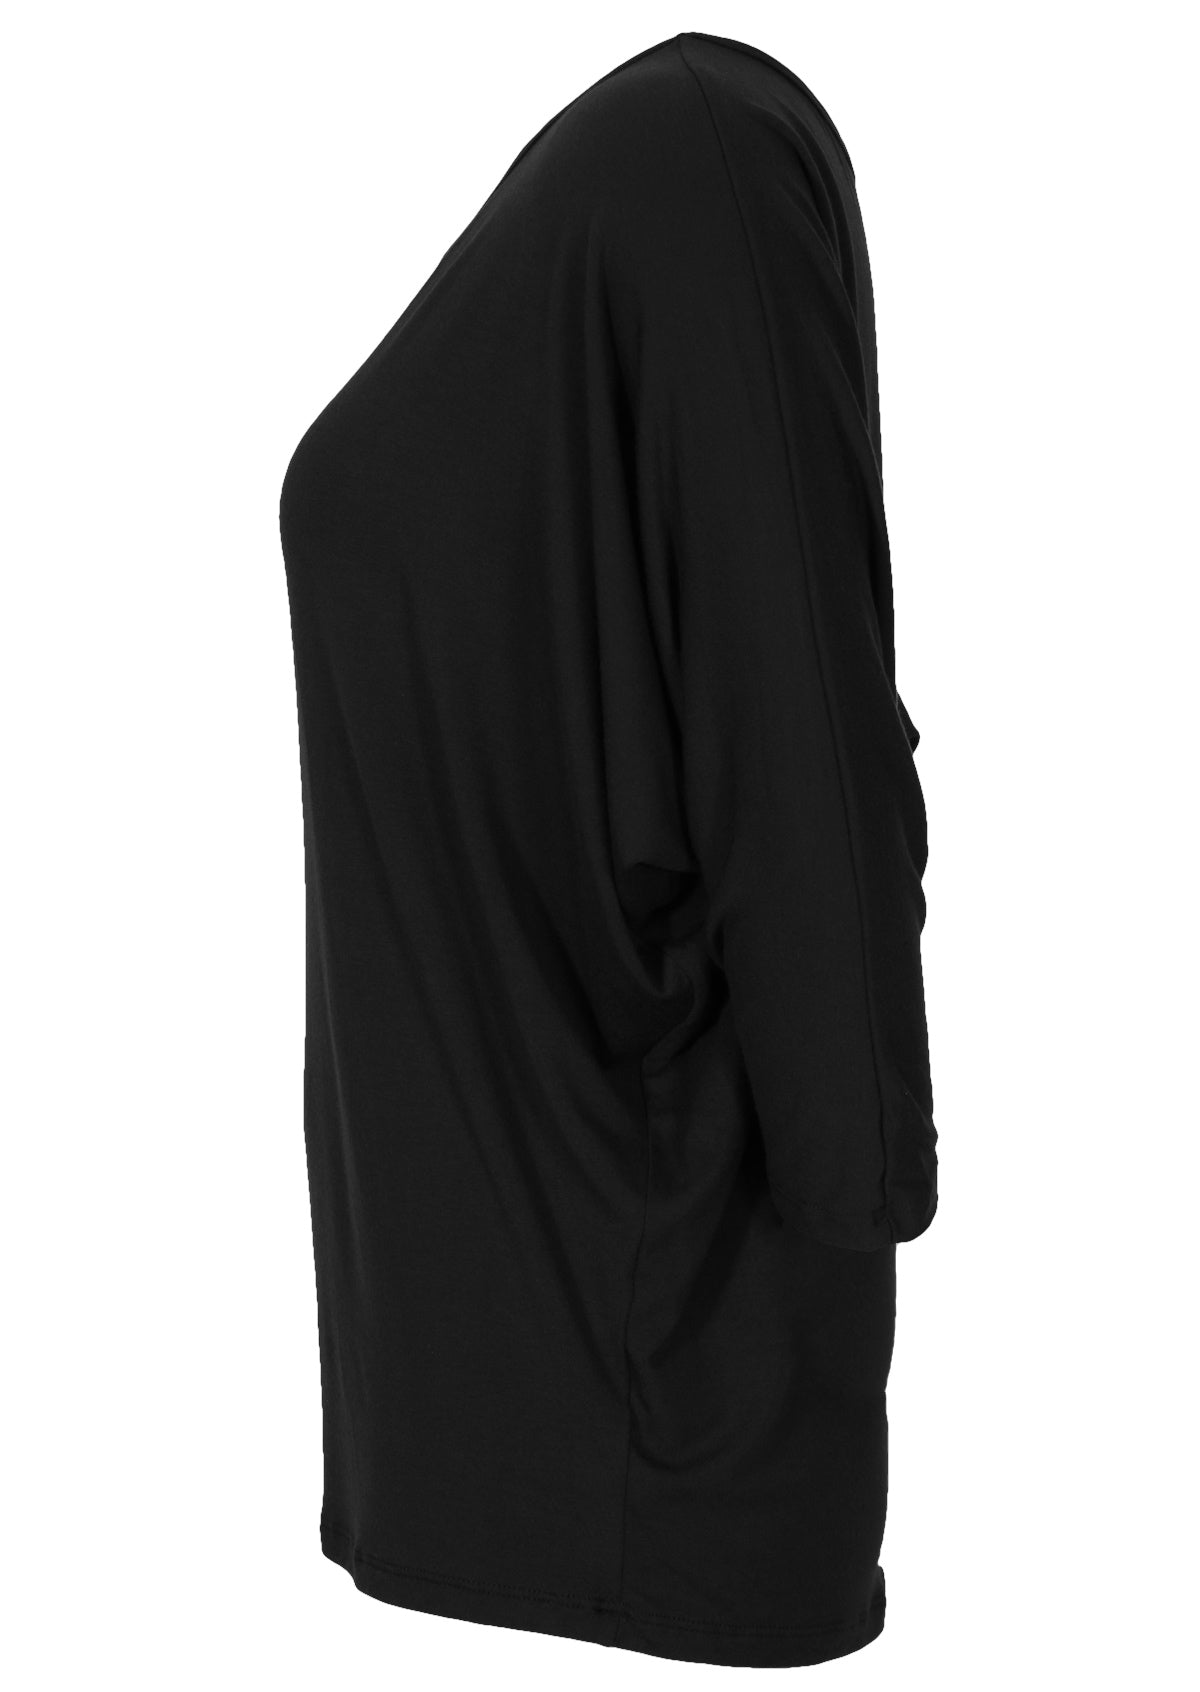 Side view of women's 3/4 sleeve rayon batwing round neckline black top.